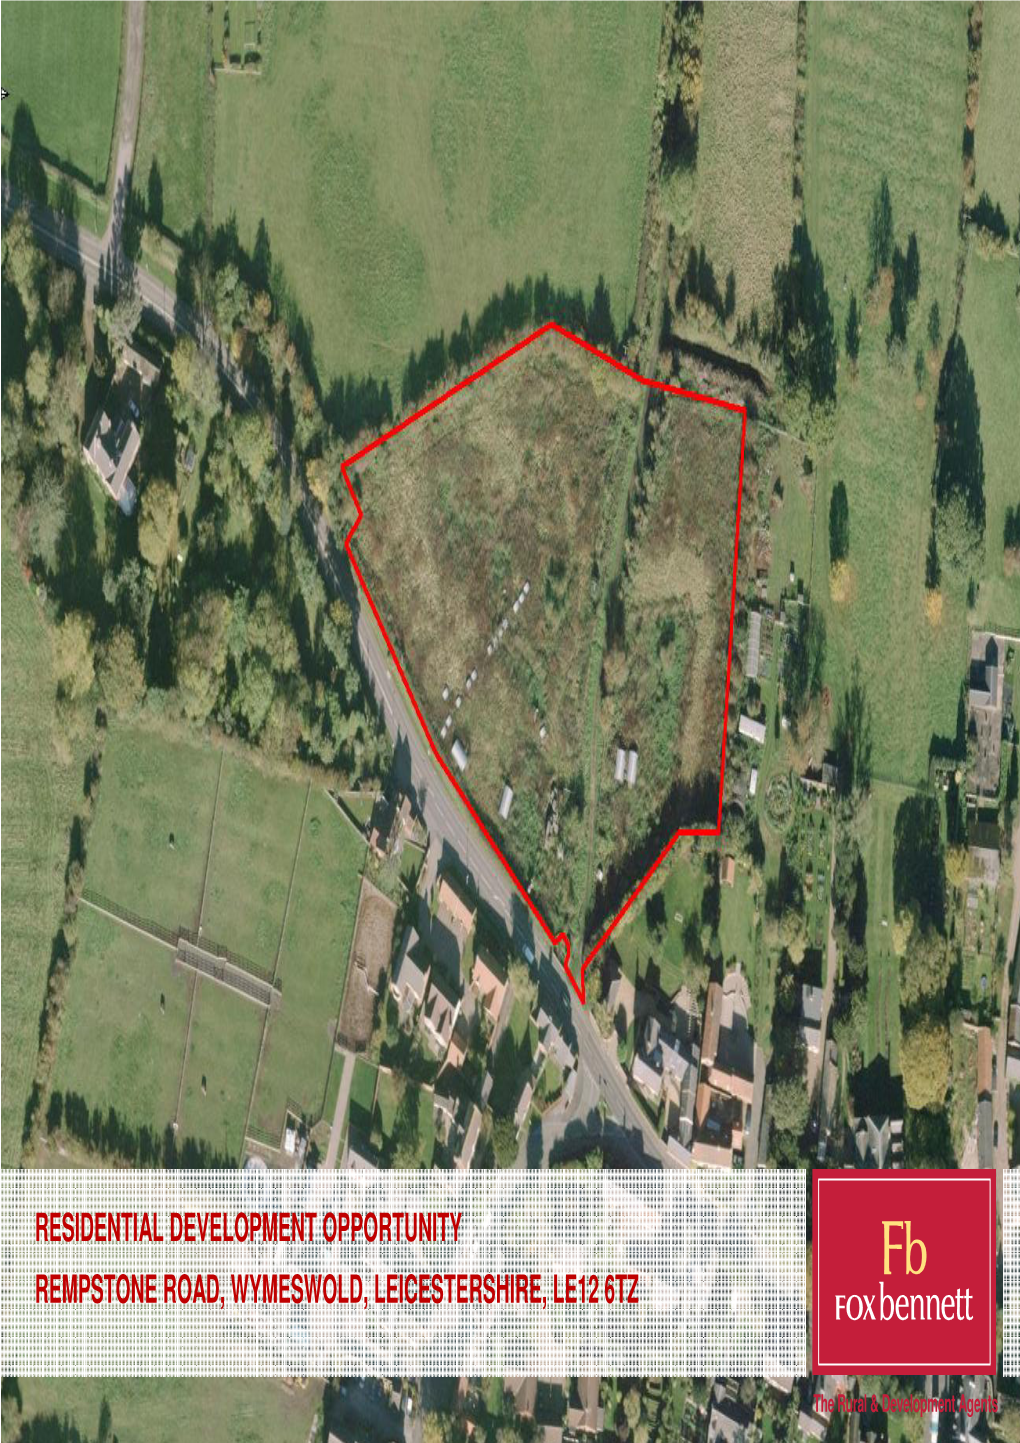 Residential Development Opportunity Rempstone Road, Wymeswold, Leicestershire, Le12 6Tz